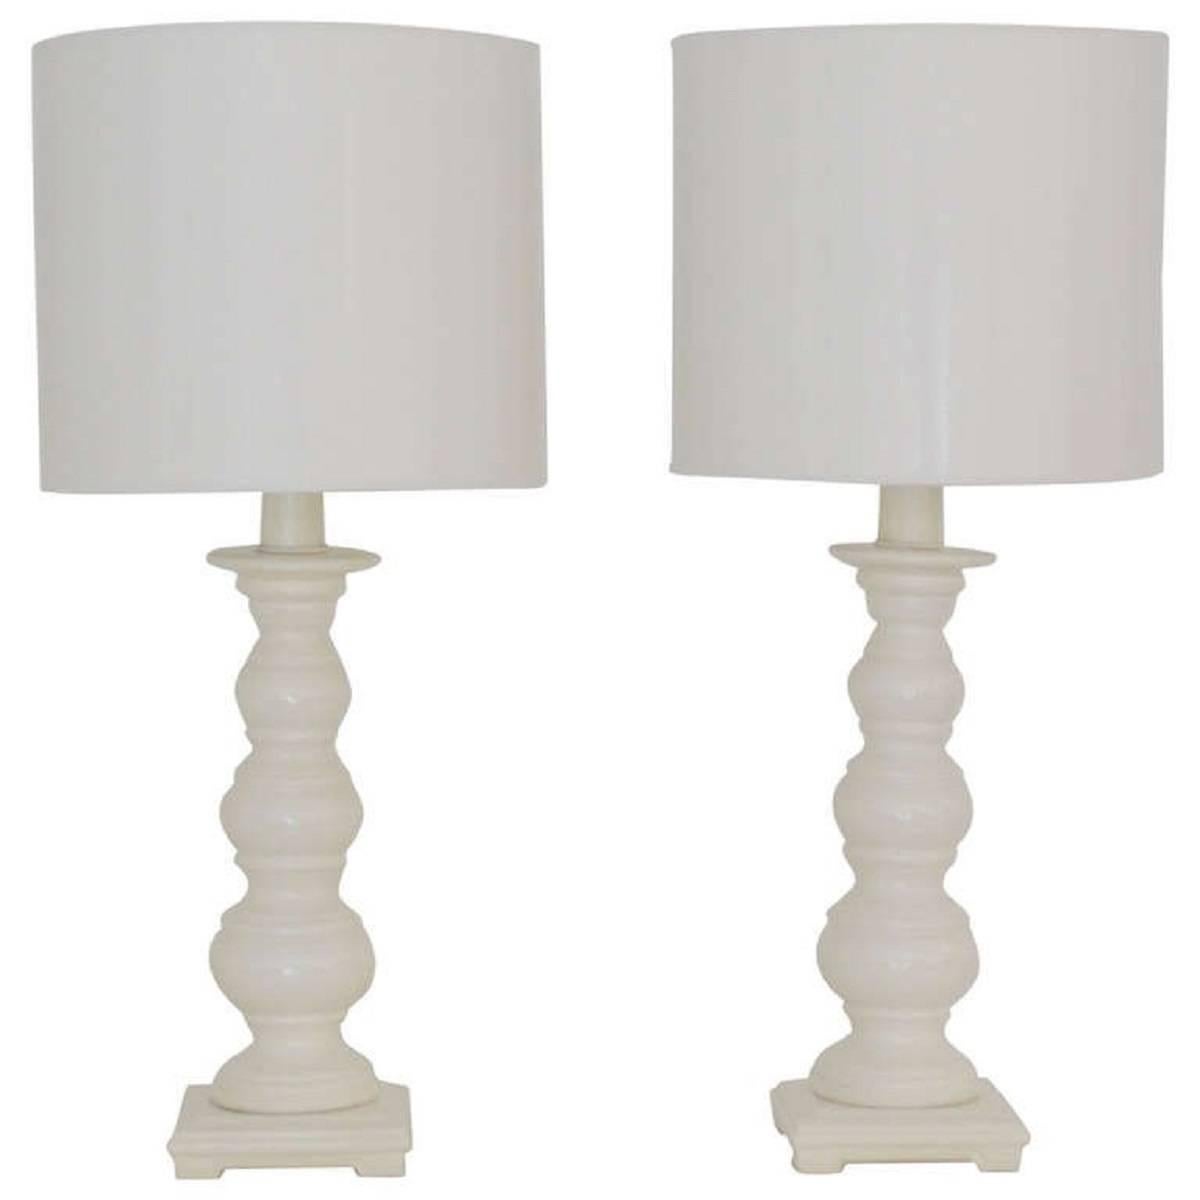 Pair of Midcentury White Glazed Ceramic Table Lamps For Sale